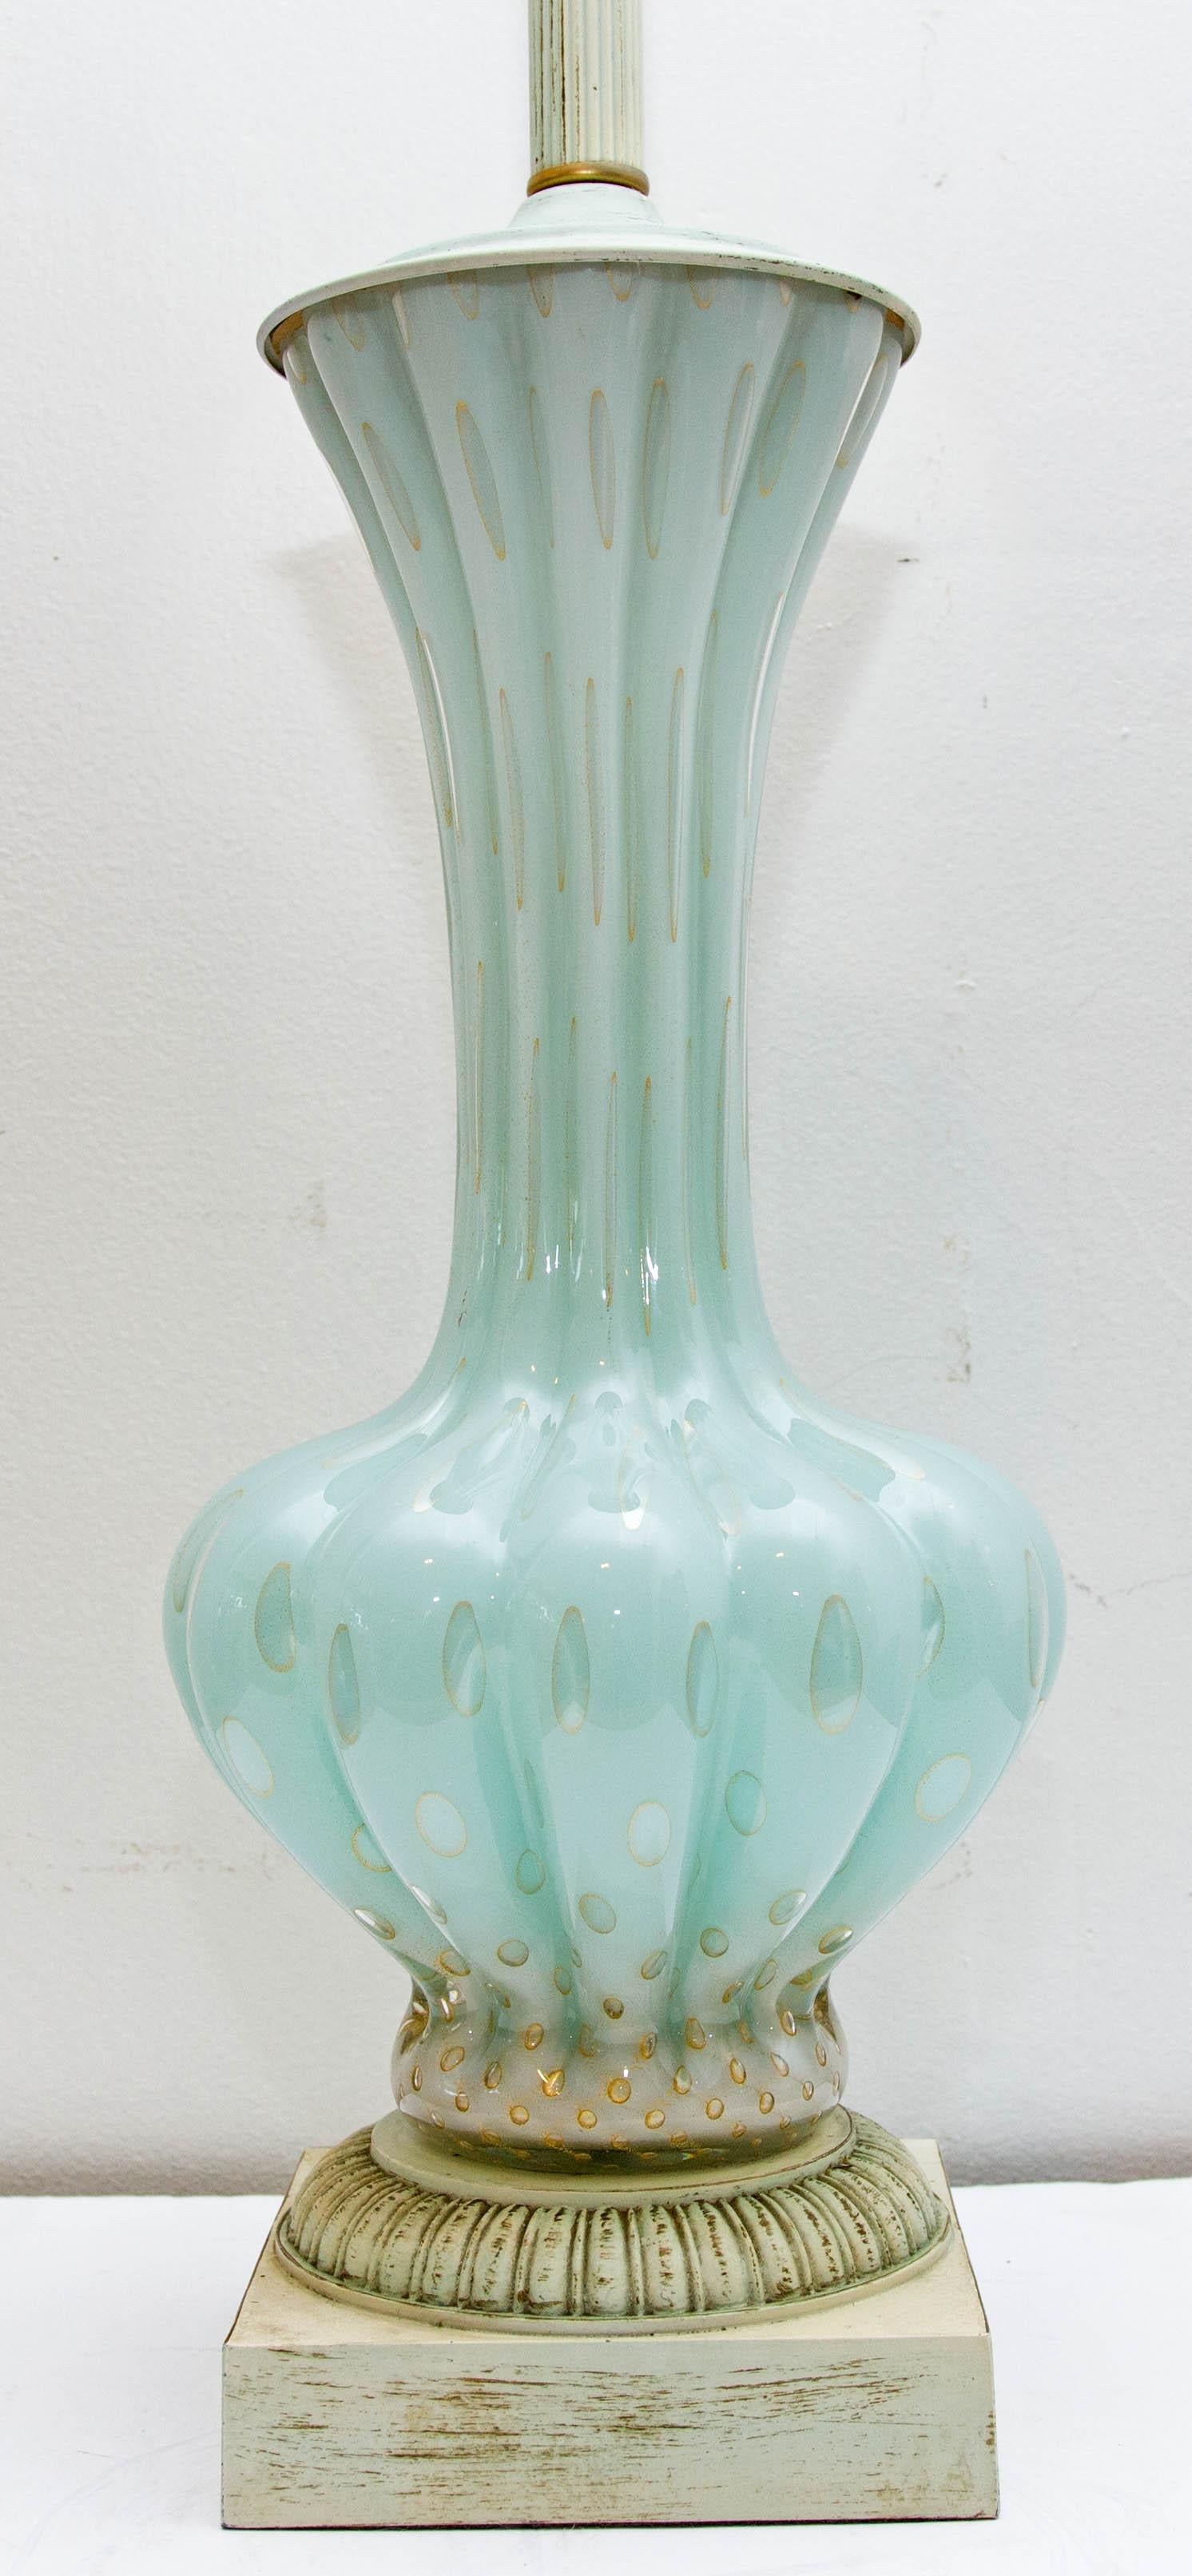 Venetian Murano glass table lamp. Light blue with gold flecks. Unusual finial, circa 1960. No shade. Height to top of finial is 37